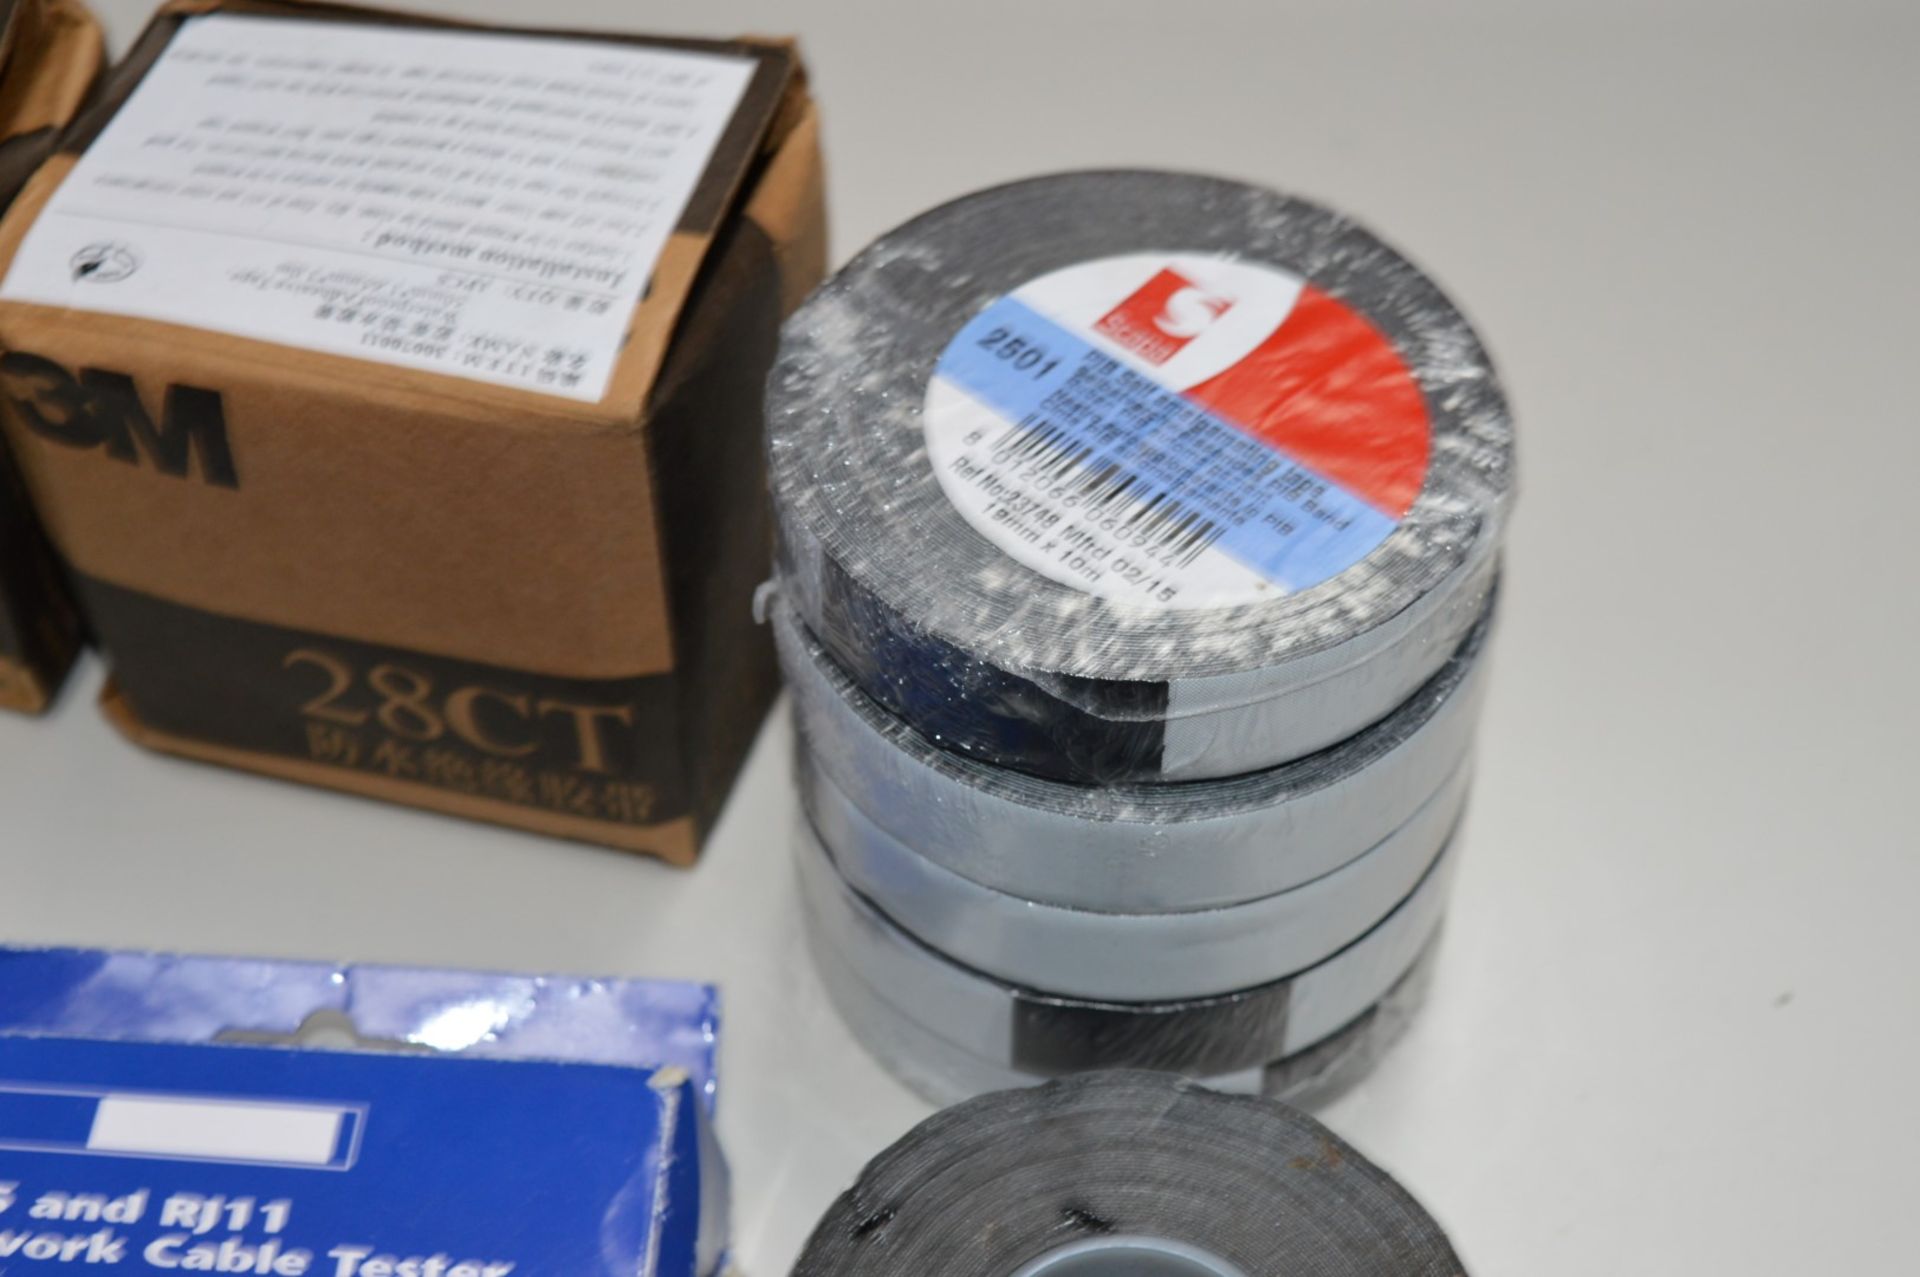 Assorted Collection of Electrical Consumables - CL300 - Includes 20 x Rolls of PVC Electrical Tape, - Image 23 of 28